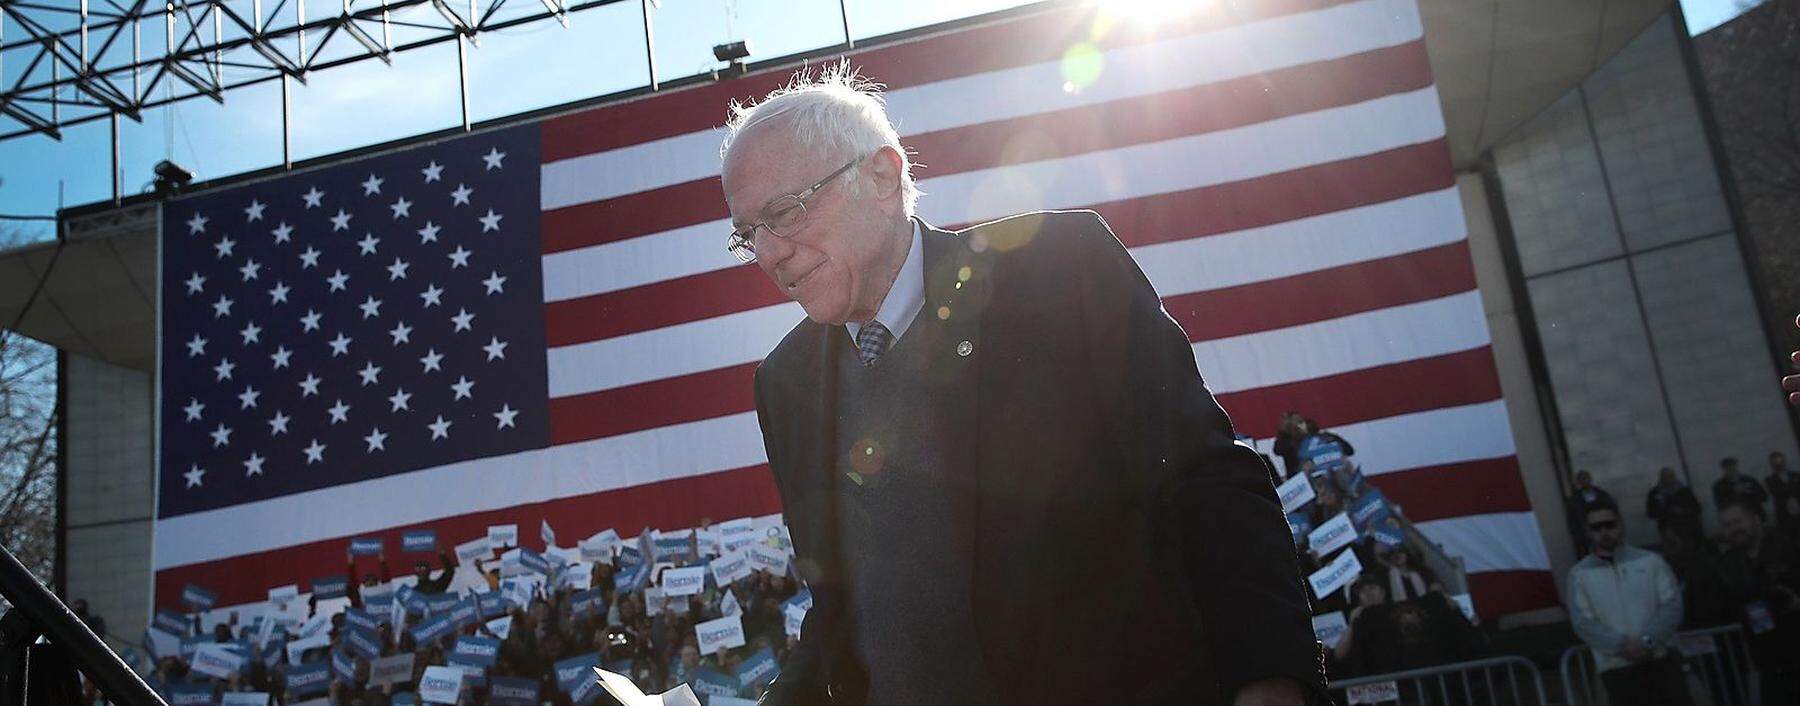 US-PRESIDENTIAL-CANDIDATE-BERNIE-SANDERS-HOLDS-CAMPAIGN-RALLY-IN